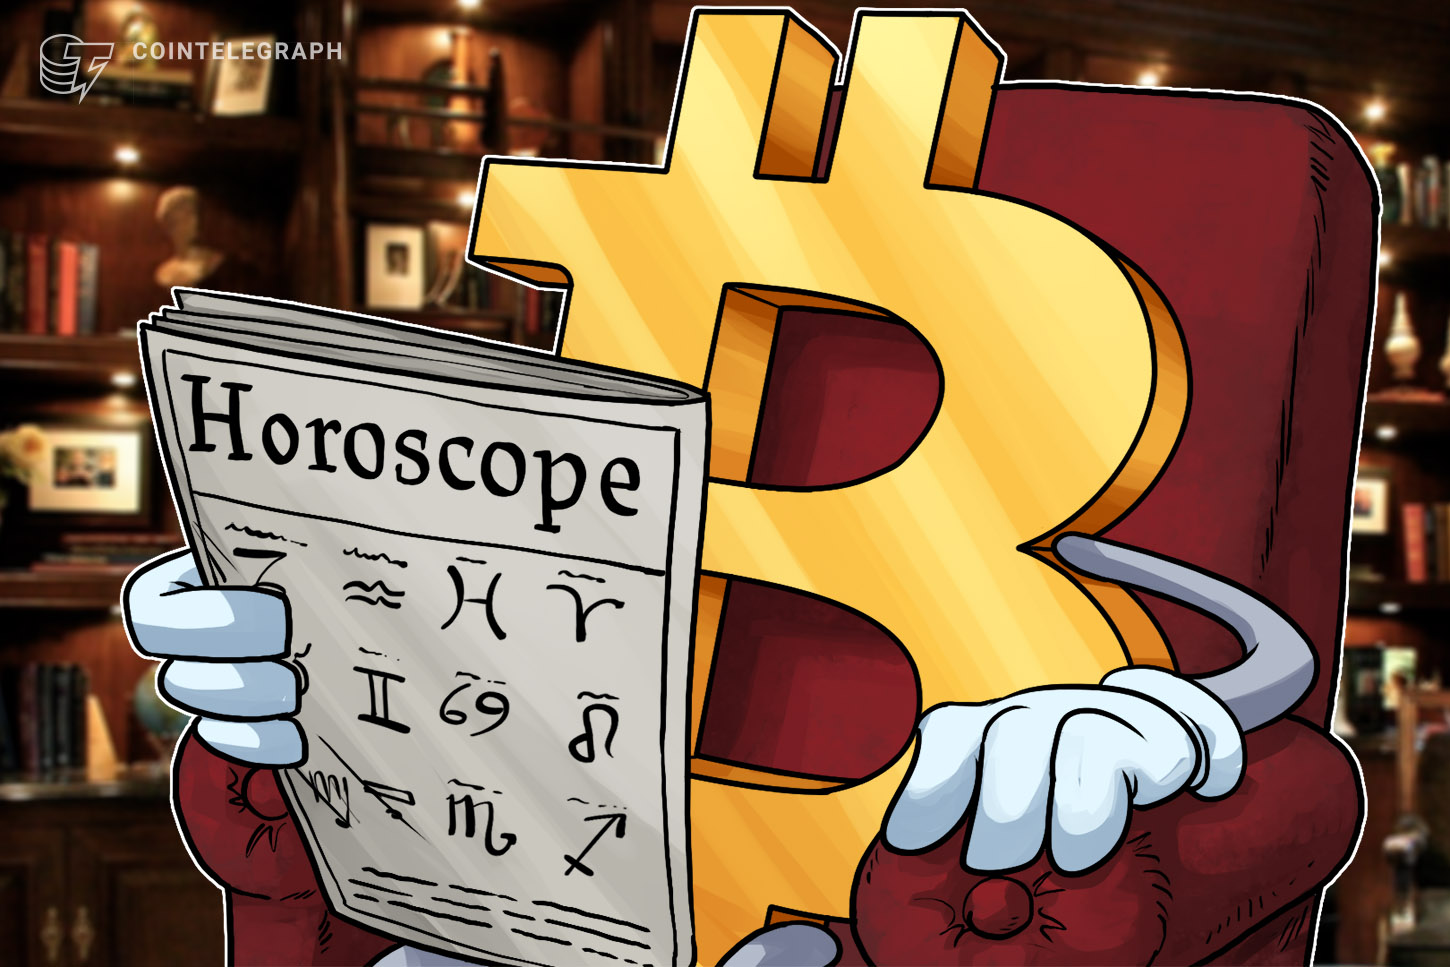 What kind of scenario, if any, may crash Bitcoin? VC agency accomplice speculates